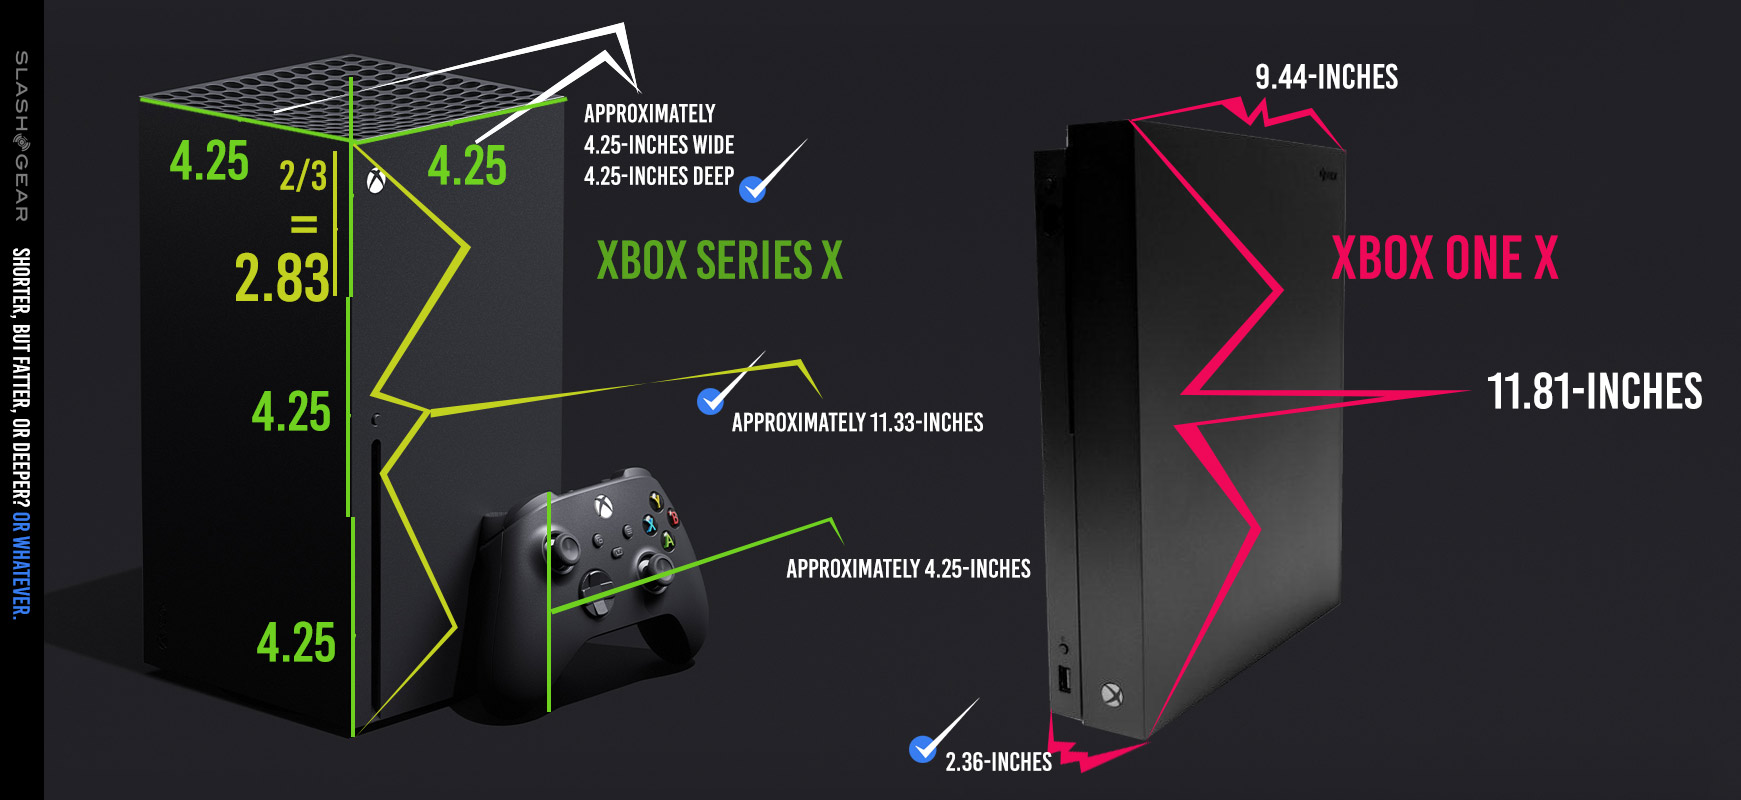 how much was the xbox one x on release